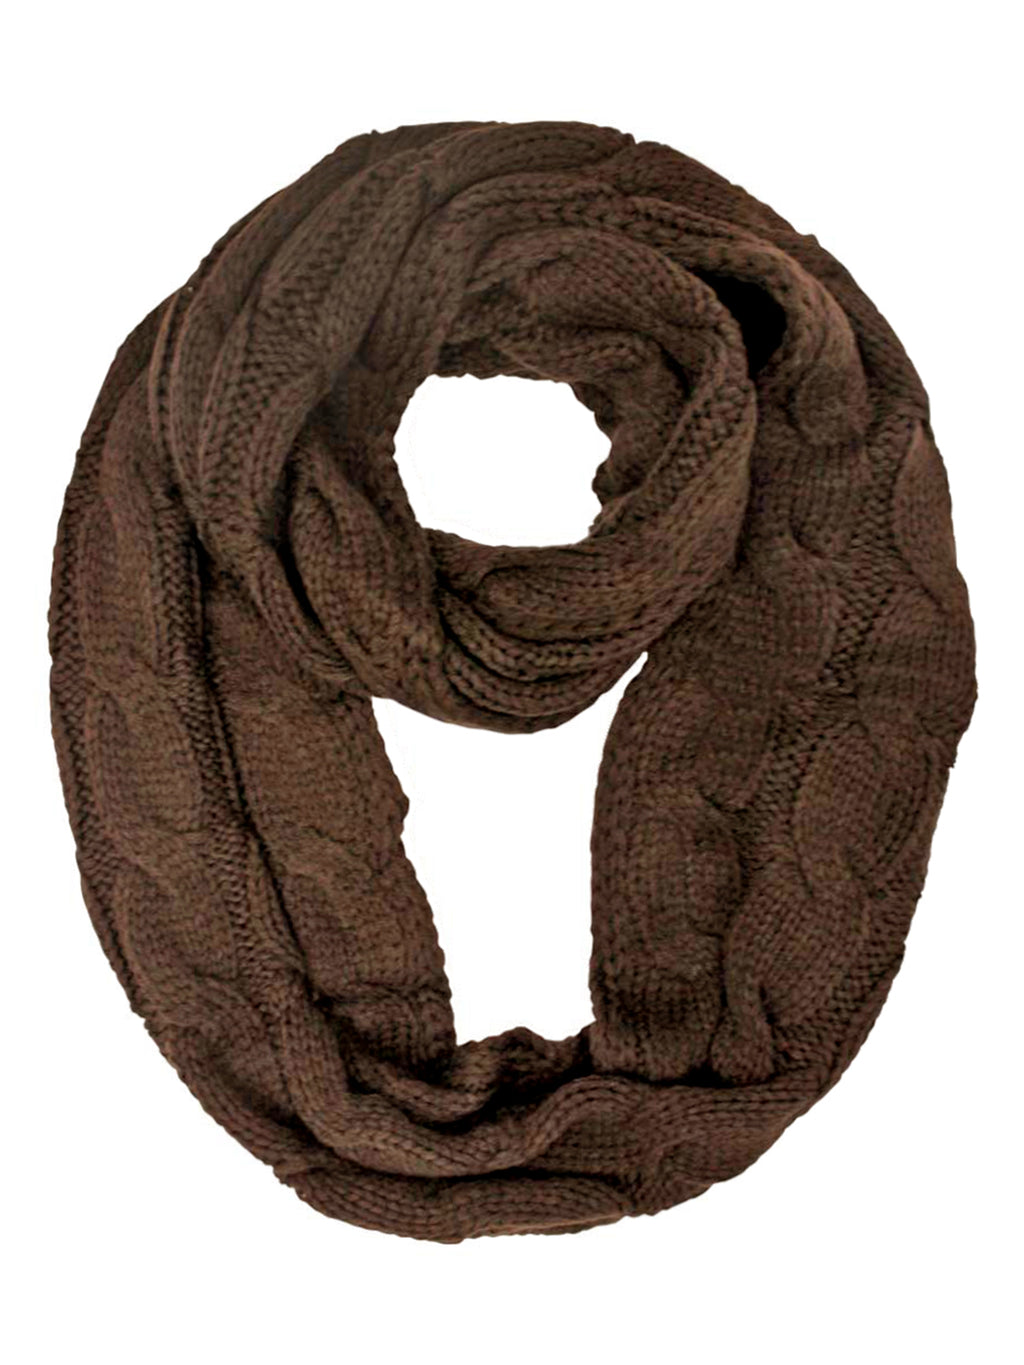 Thick Cable Braid Knit Infinity Scarf